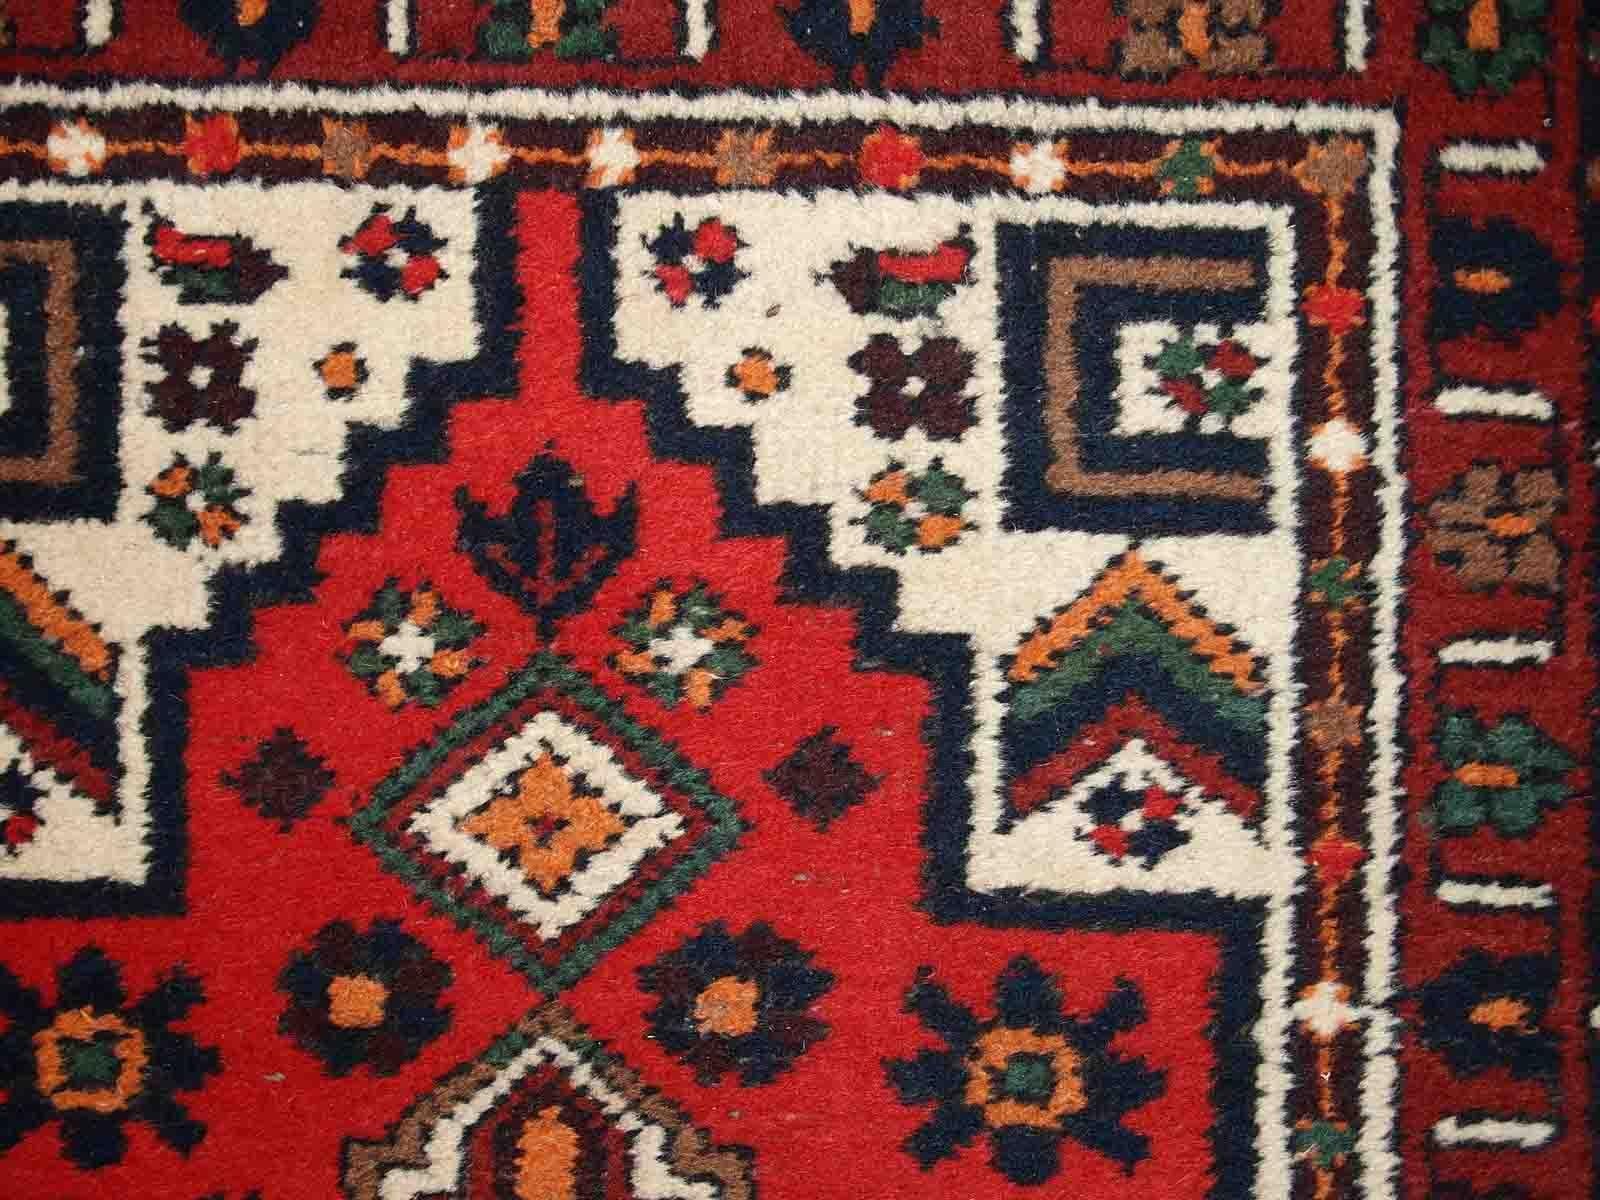 Handmade vintage Middle Eastern rug in traditional design. The rug is from the end of 20th century in original good condition. 

-condition: original good,

-circa: 1970s,

-size: 2.4' x 4.5' (74cm x 140cm),
?
-material: wool,

-country of